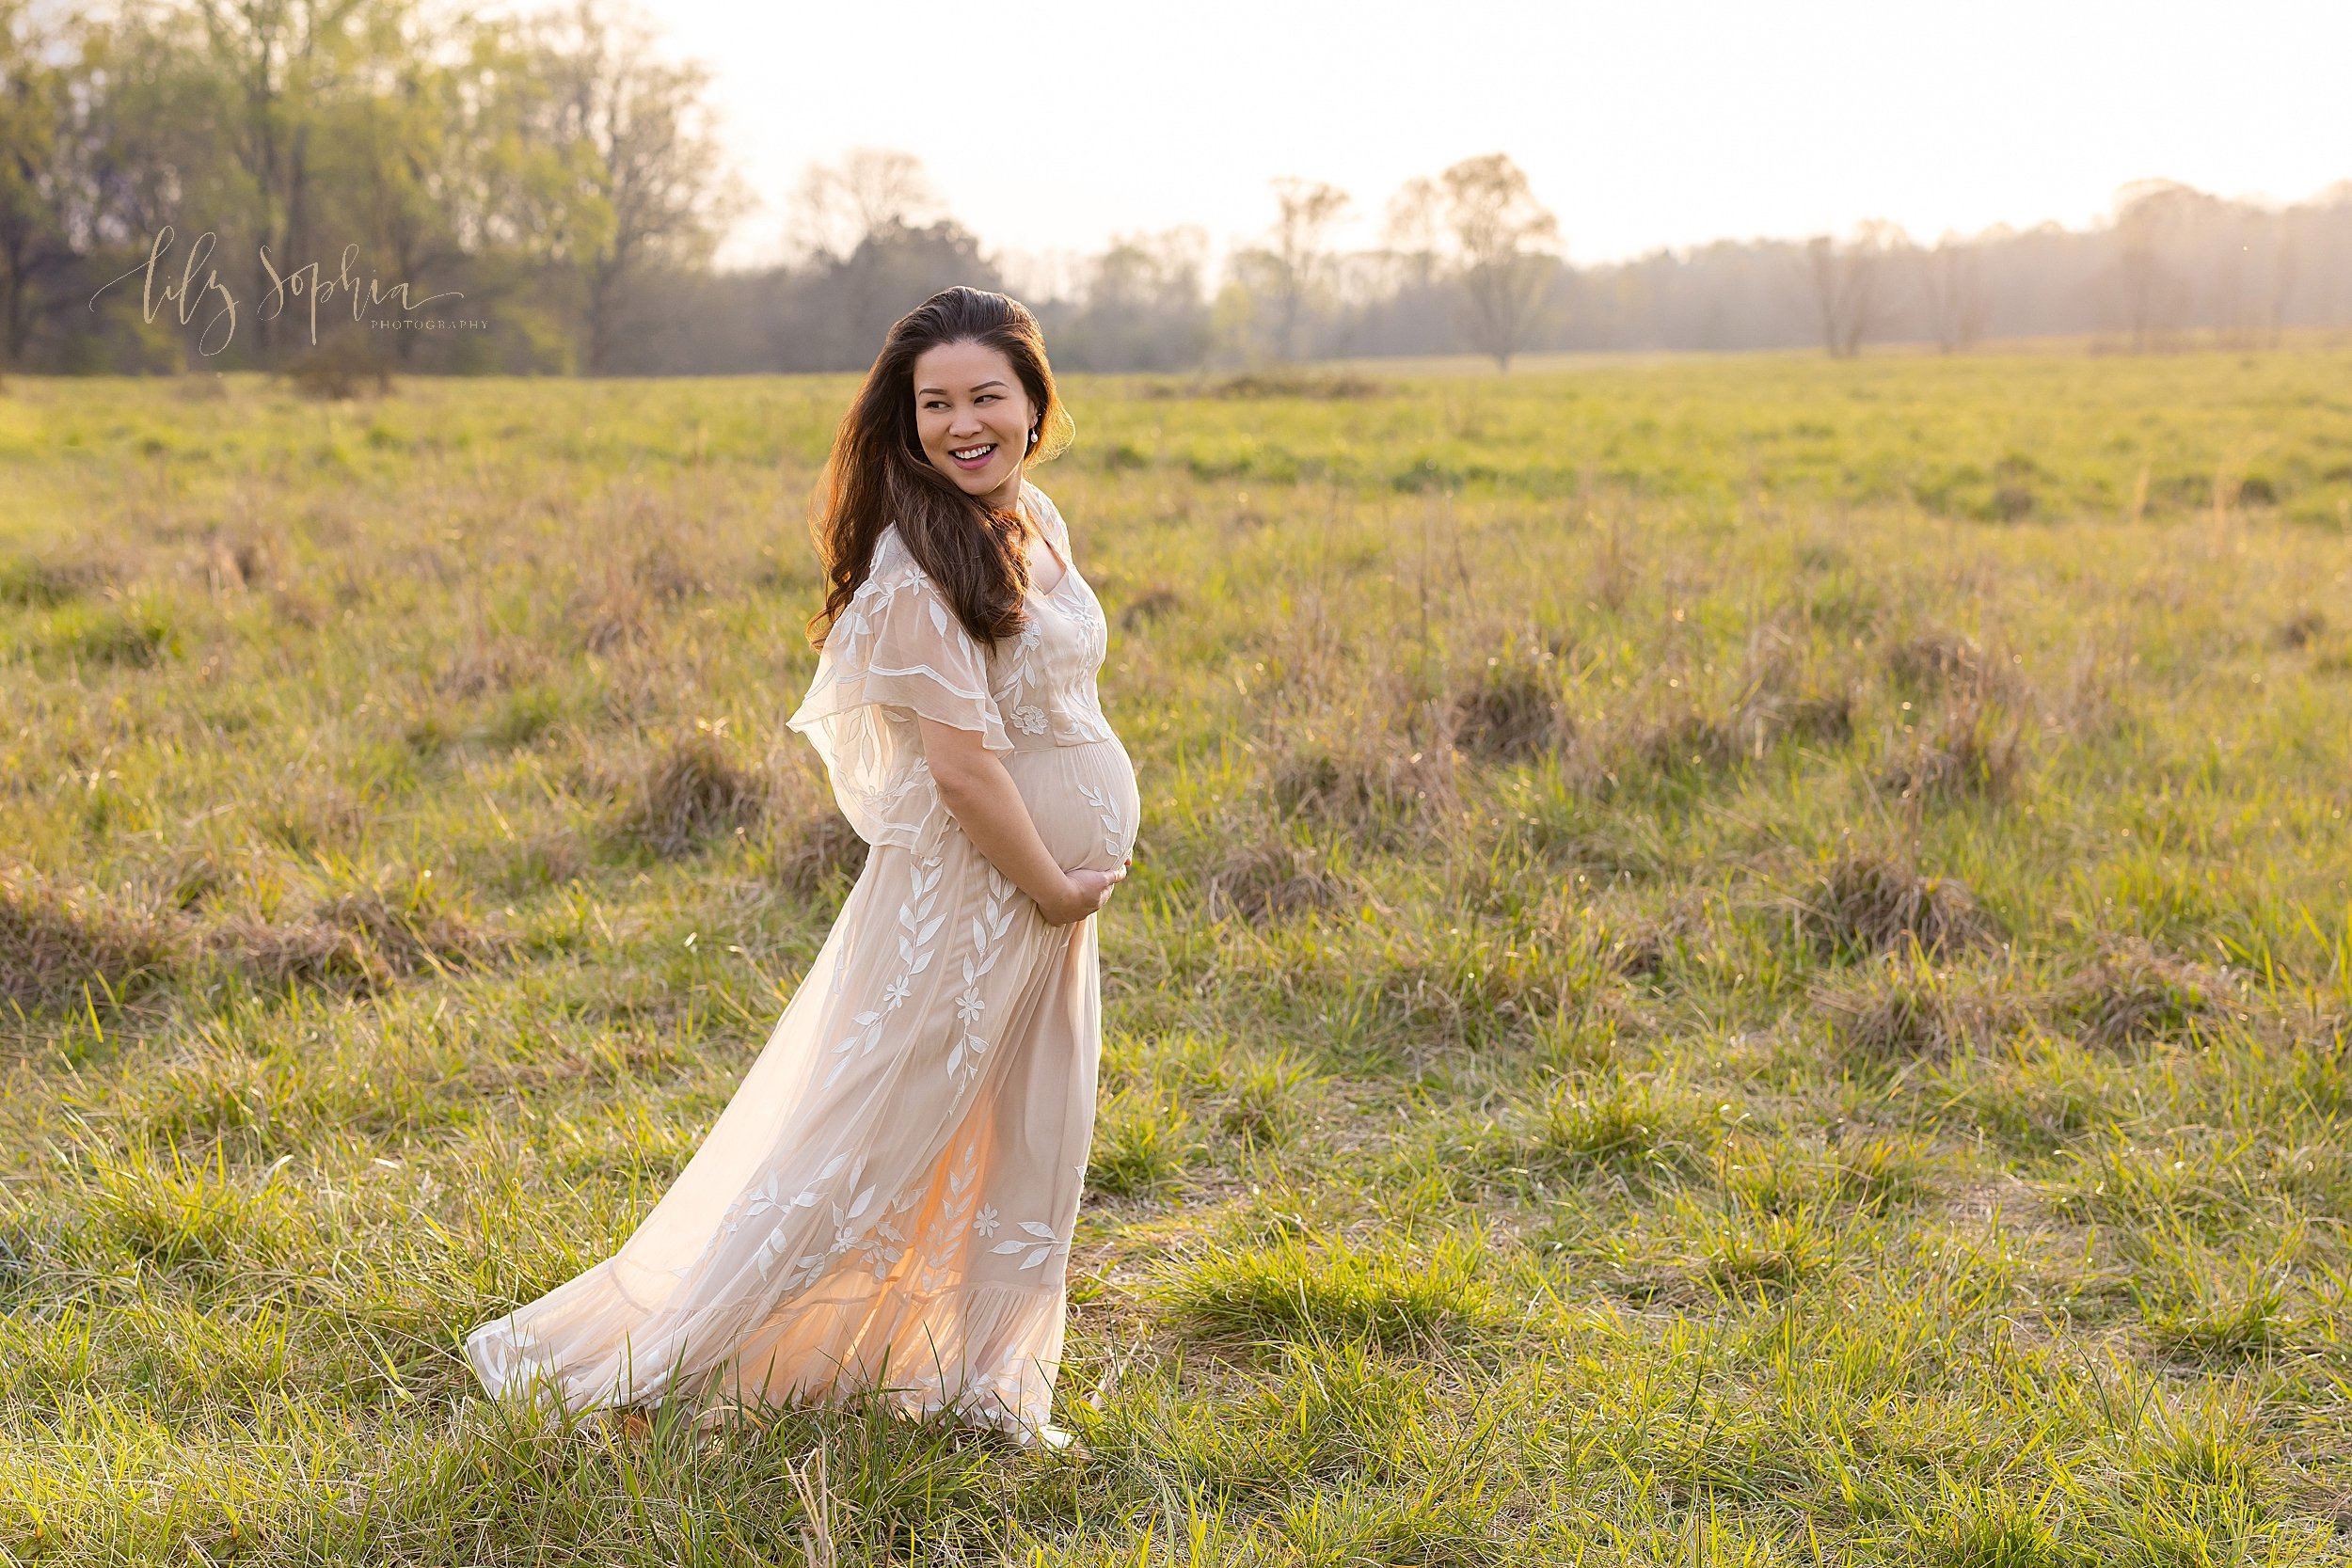  Maternity portrait of a radiant expectant mother as she walks in an Atlanta field holding her belly at sunset as she turns her head to look over her right shoulder. 